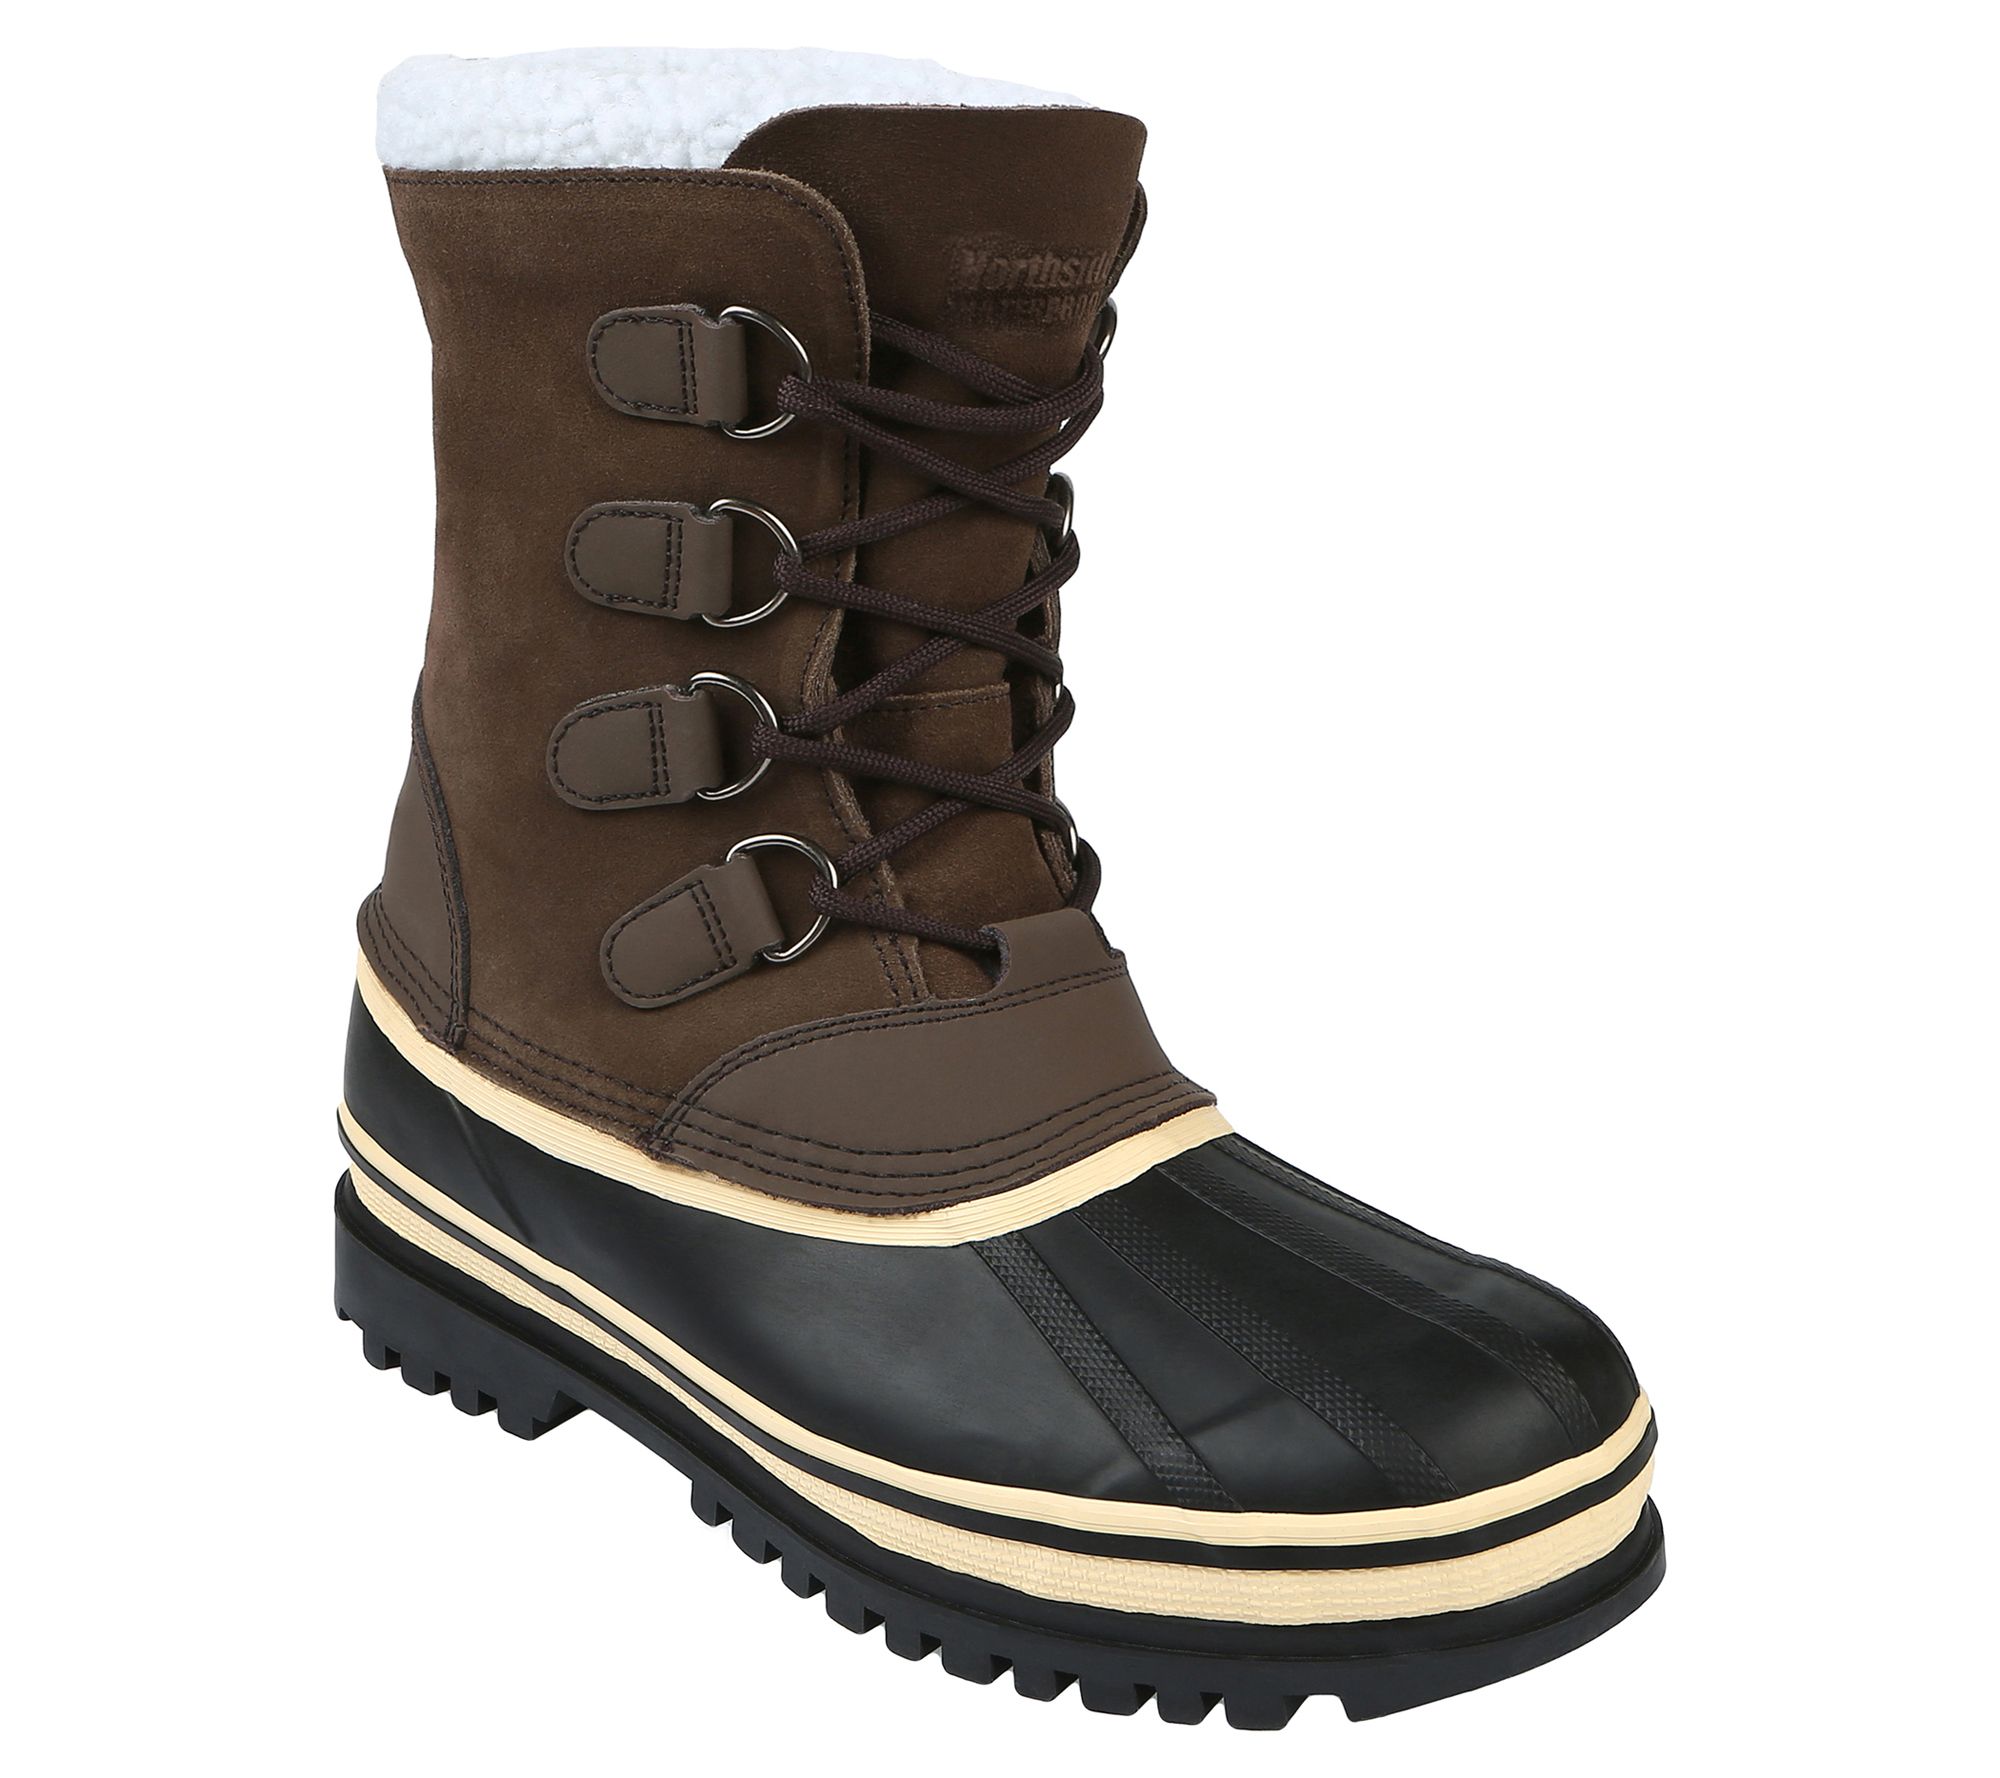 Northside Men's Waterproof Insulated Snow Boots- Back Country - QVC.com